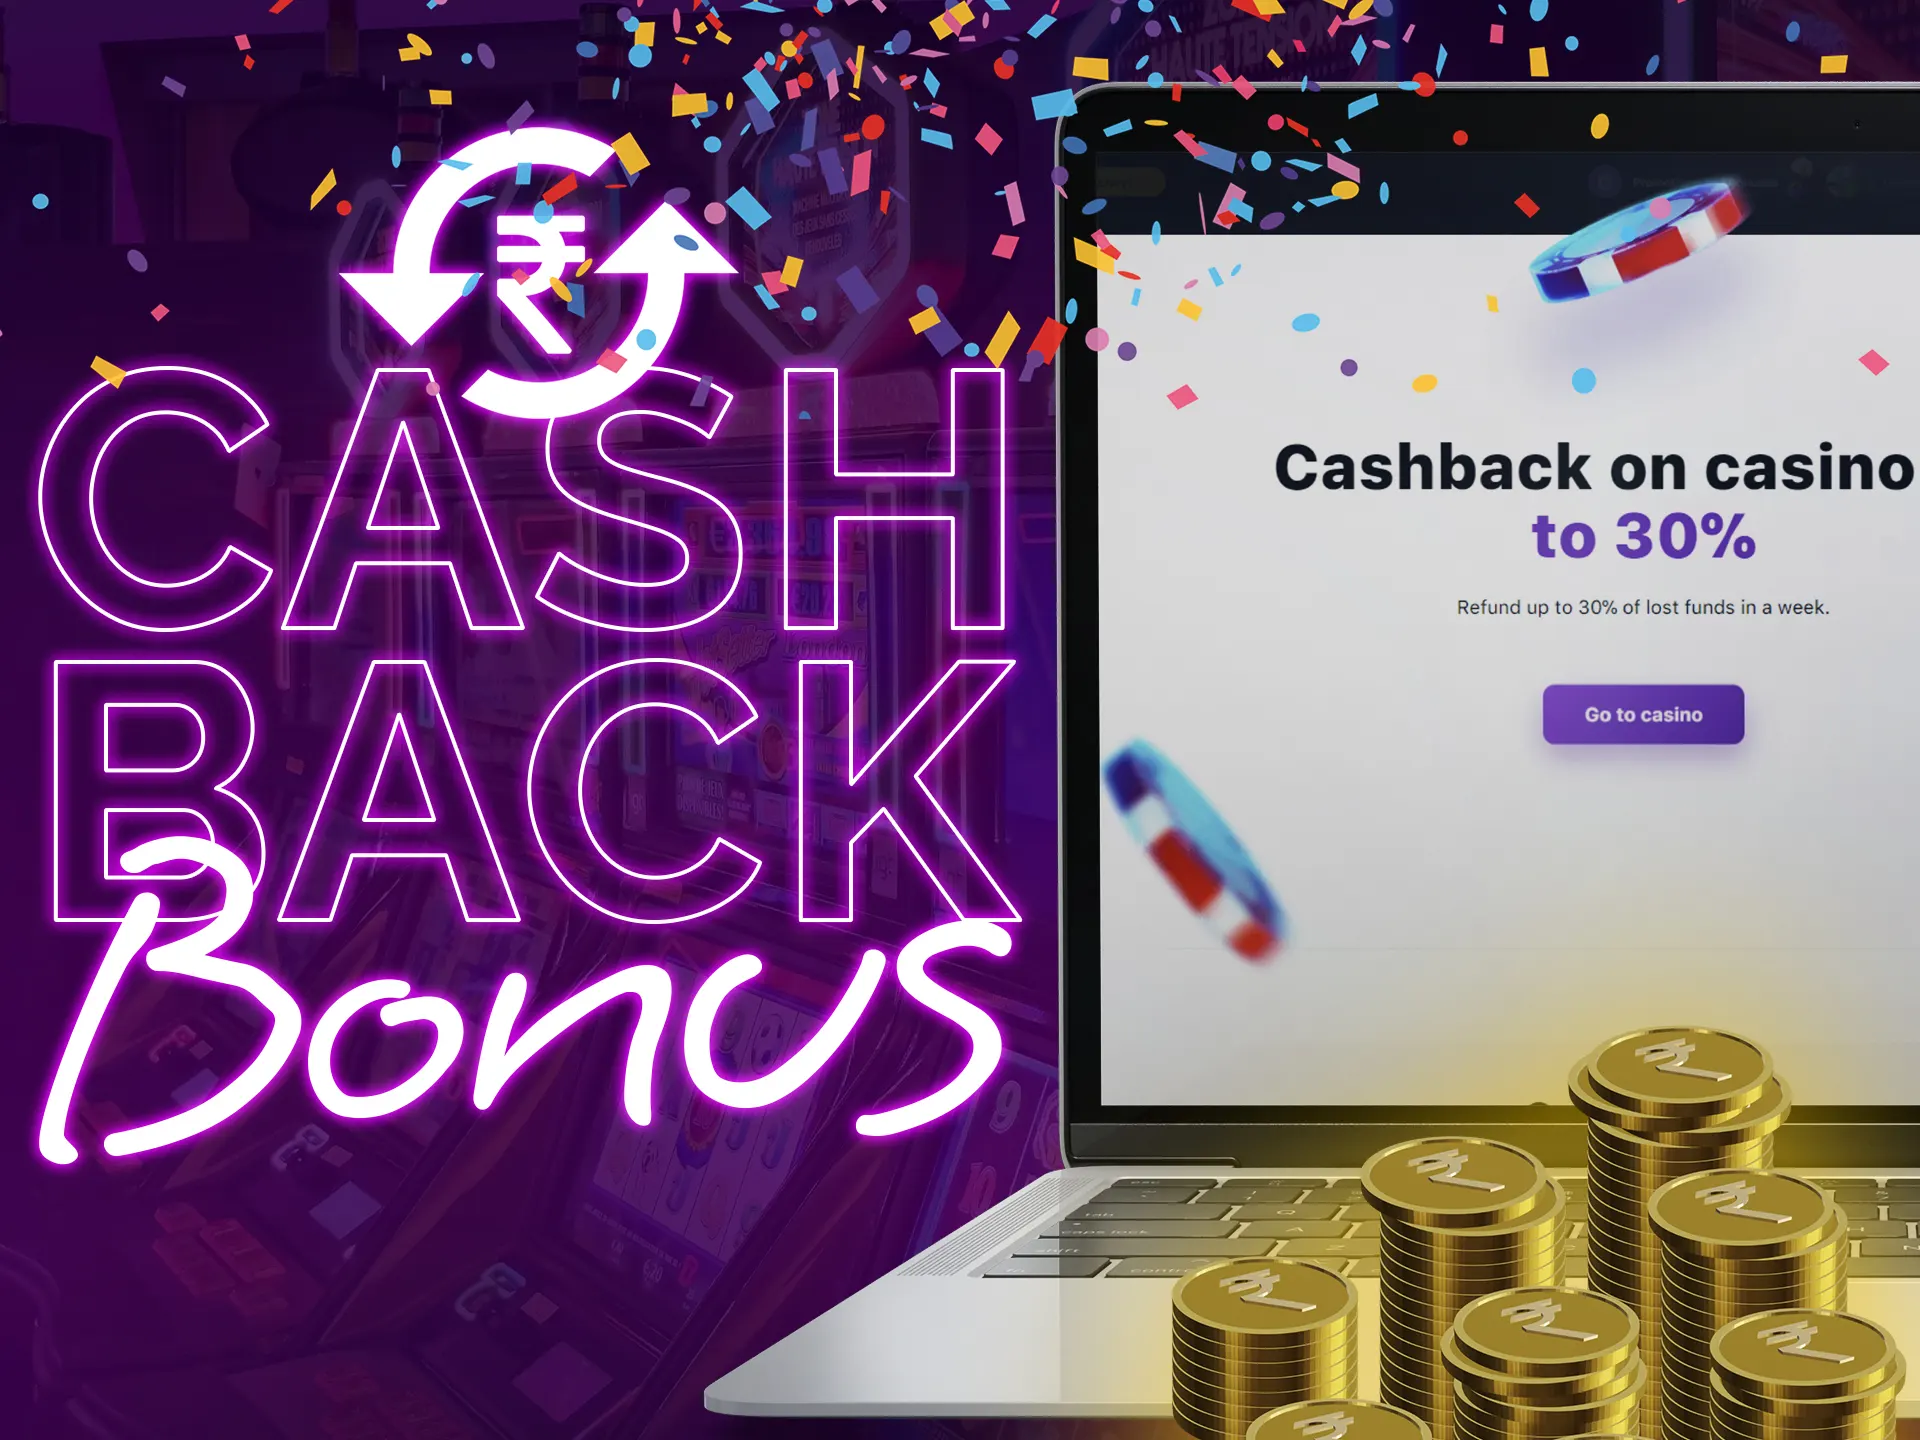 A cashback bonus usually reimburses players for a portion of their losses.